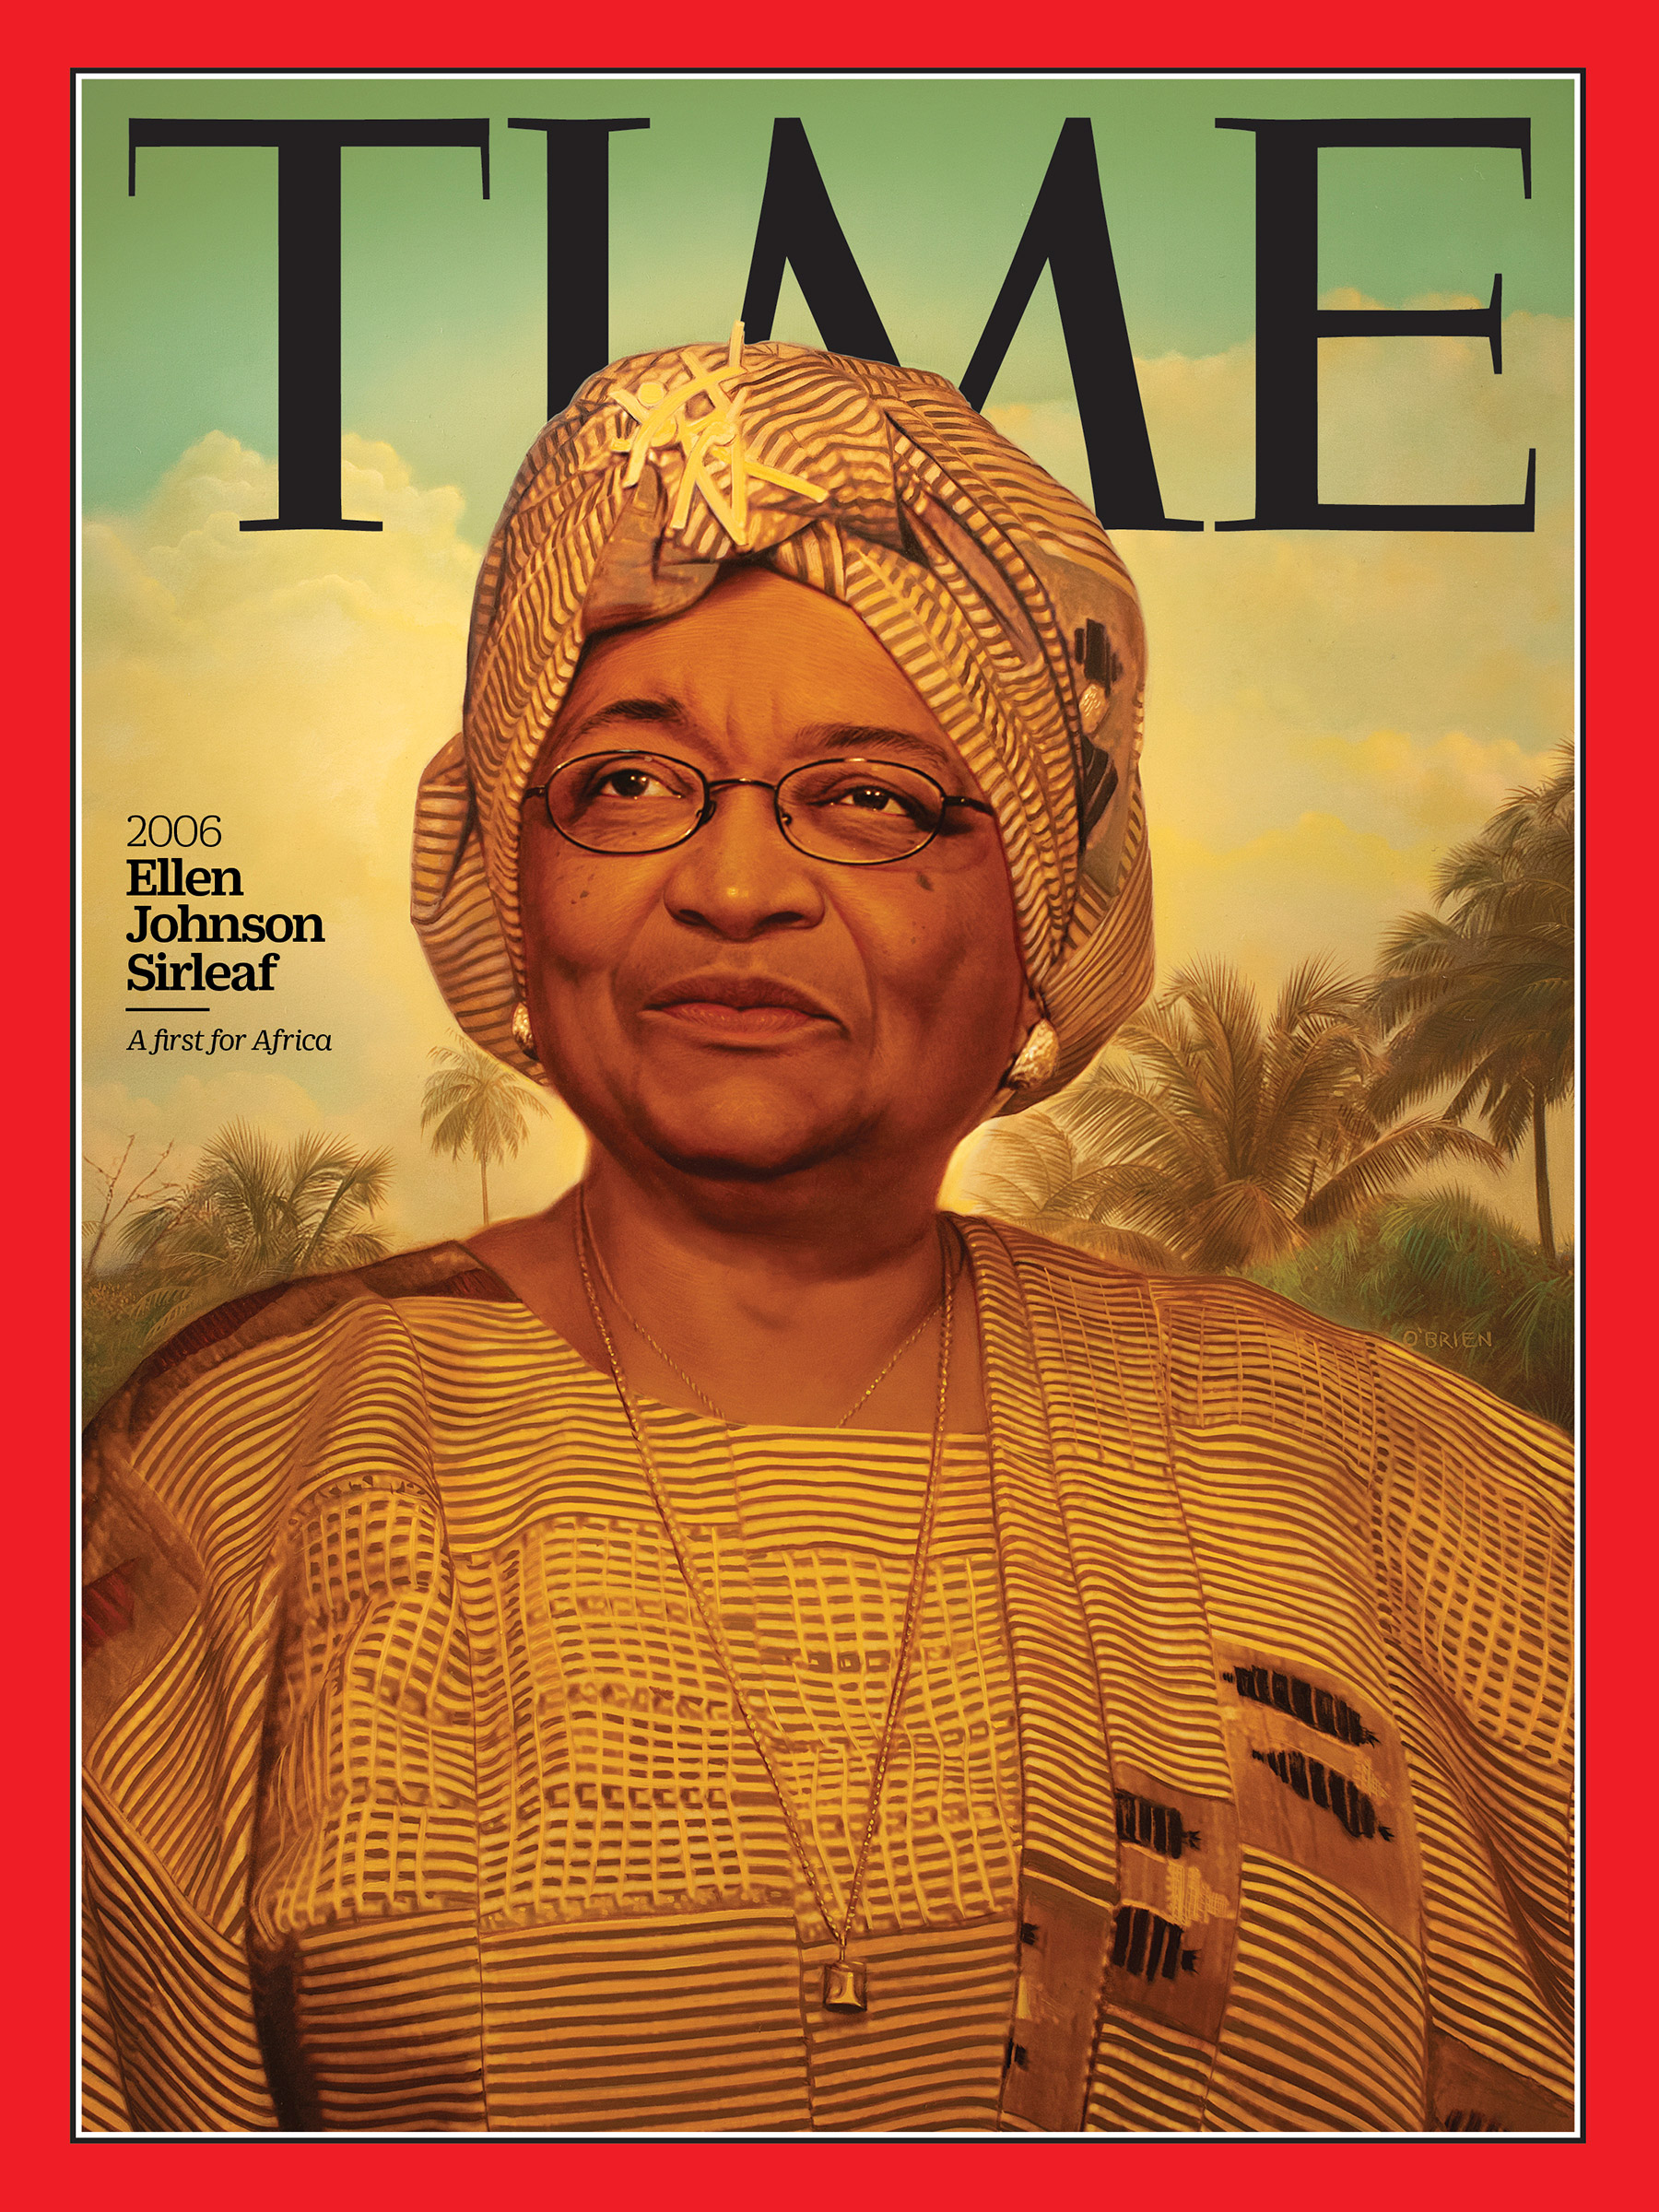 <a href="https://fineartamerica.com/featured/ellen-johnson-sirleaf-2006-time.html"><strong>Buy the cover art→</strong></a> (Illustration by Tim O'Brien)